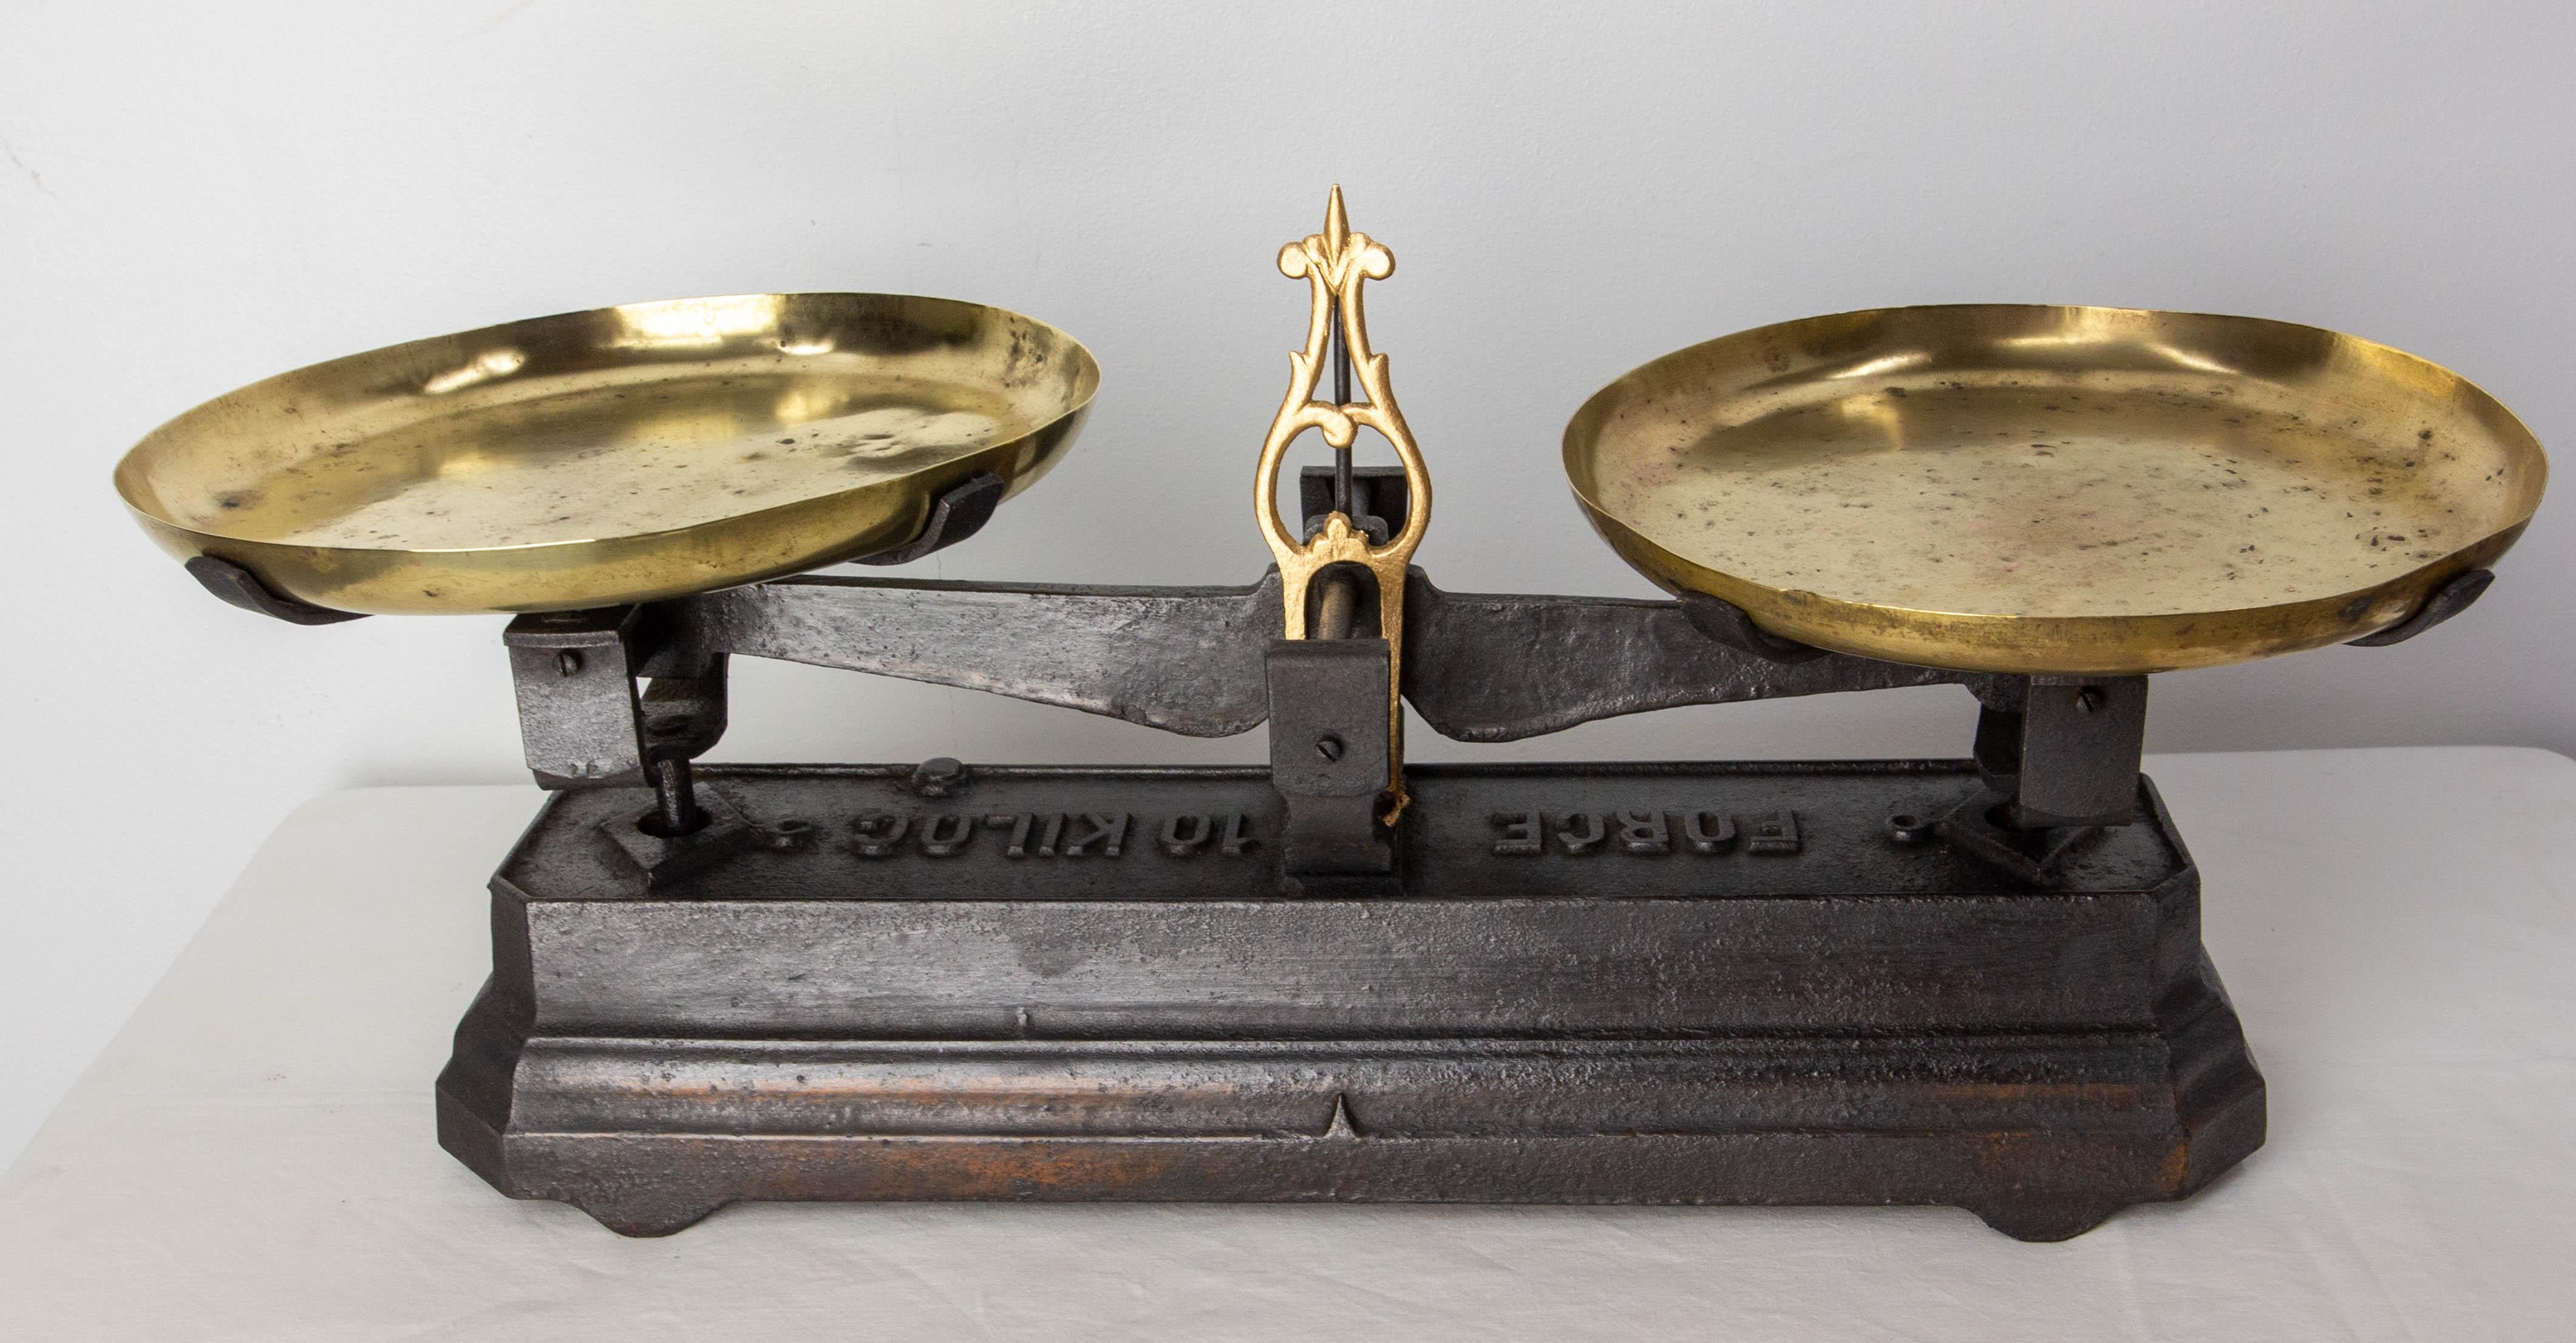 This trade scale was made in the late 19th century in France. It was a scale used by traders for retail
Brass and Cast-Iron
Patina and signs of use which make this antique object very characterful
Noticed in the cast iron : 